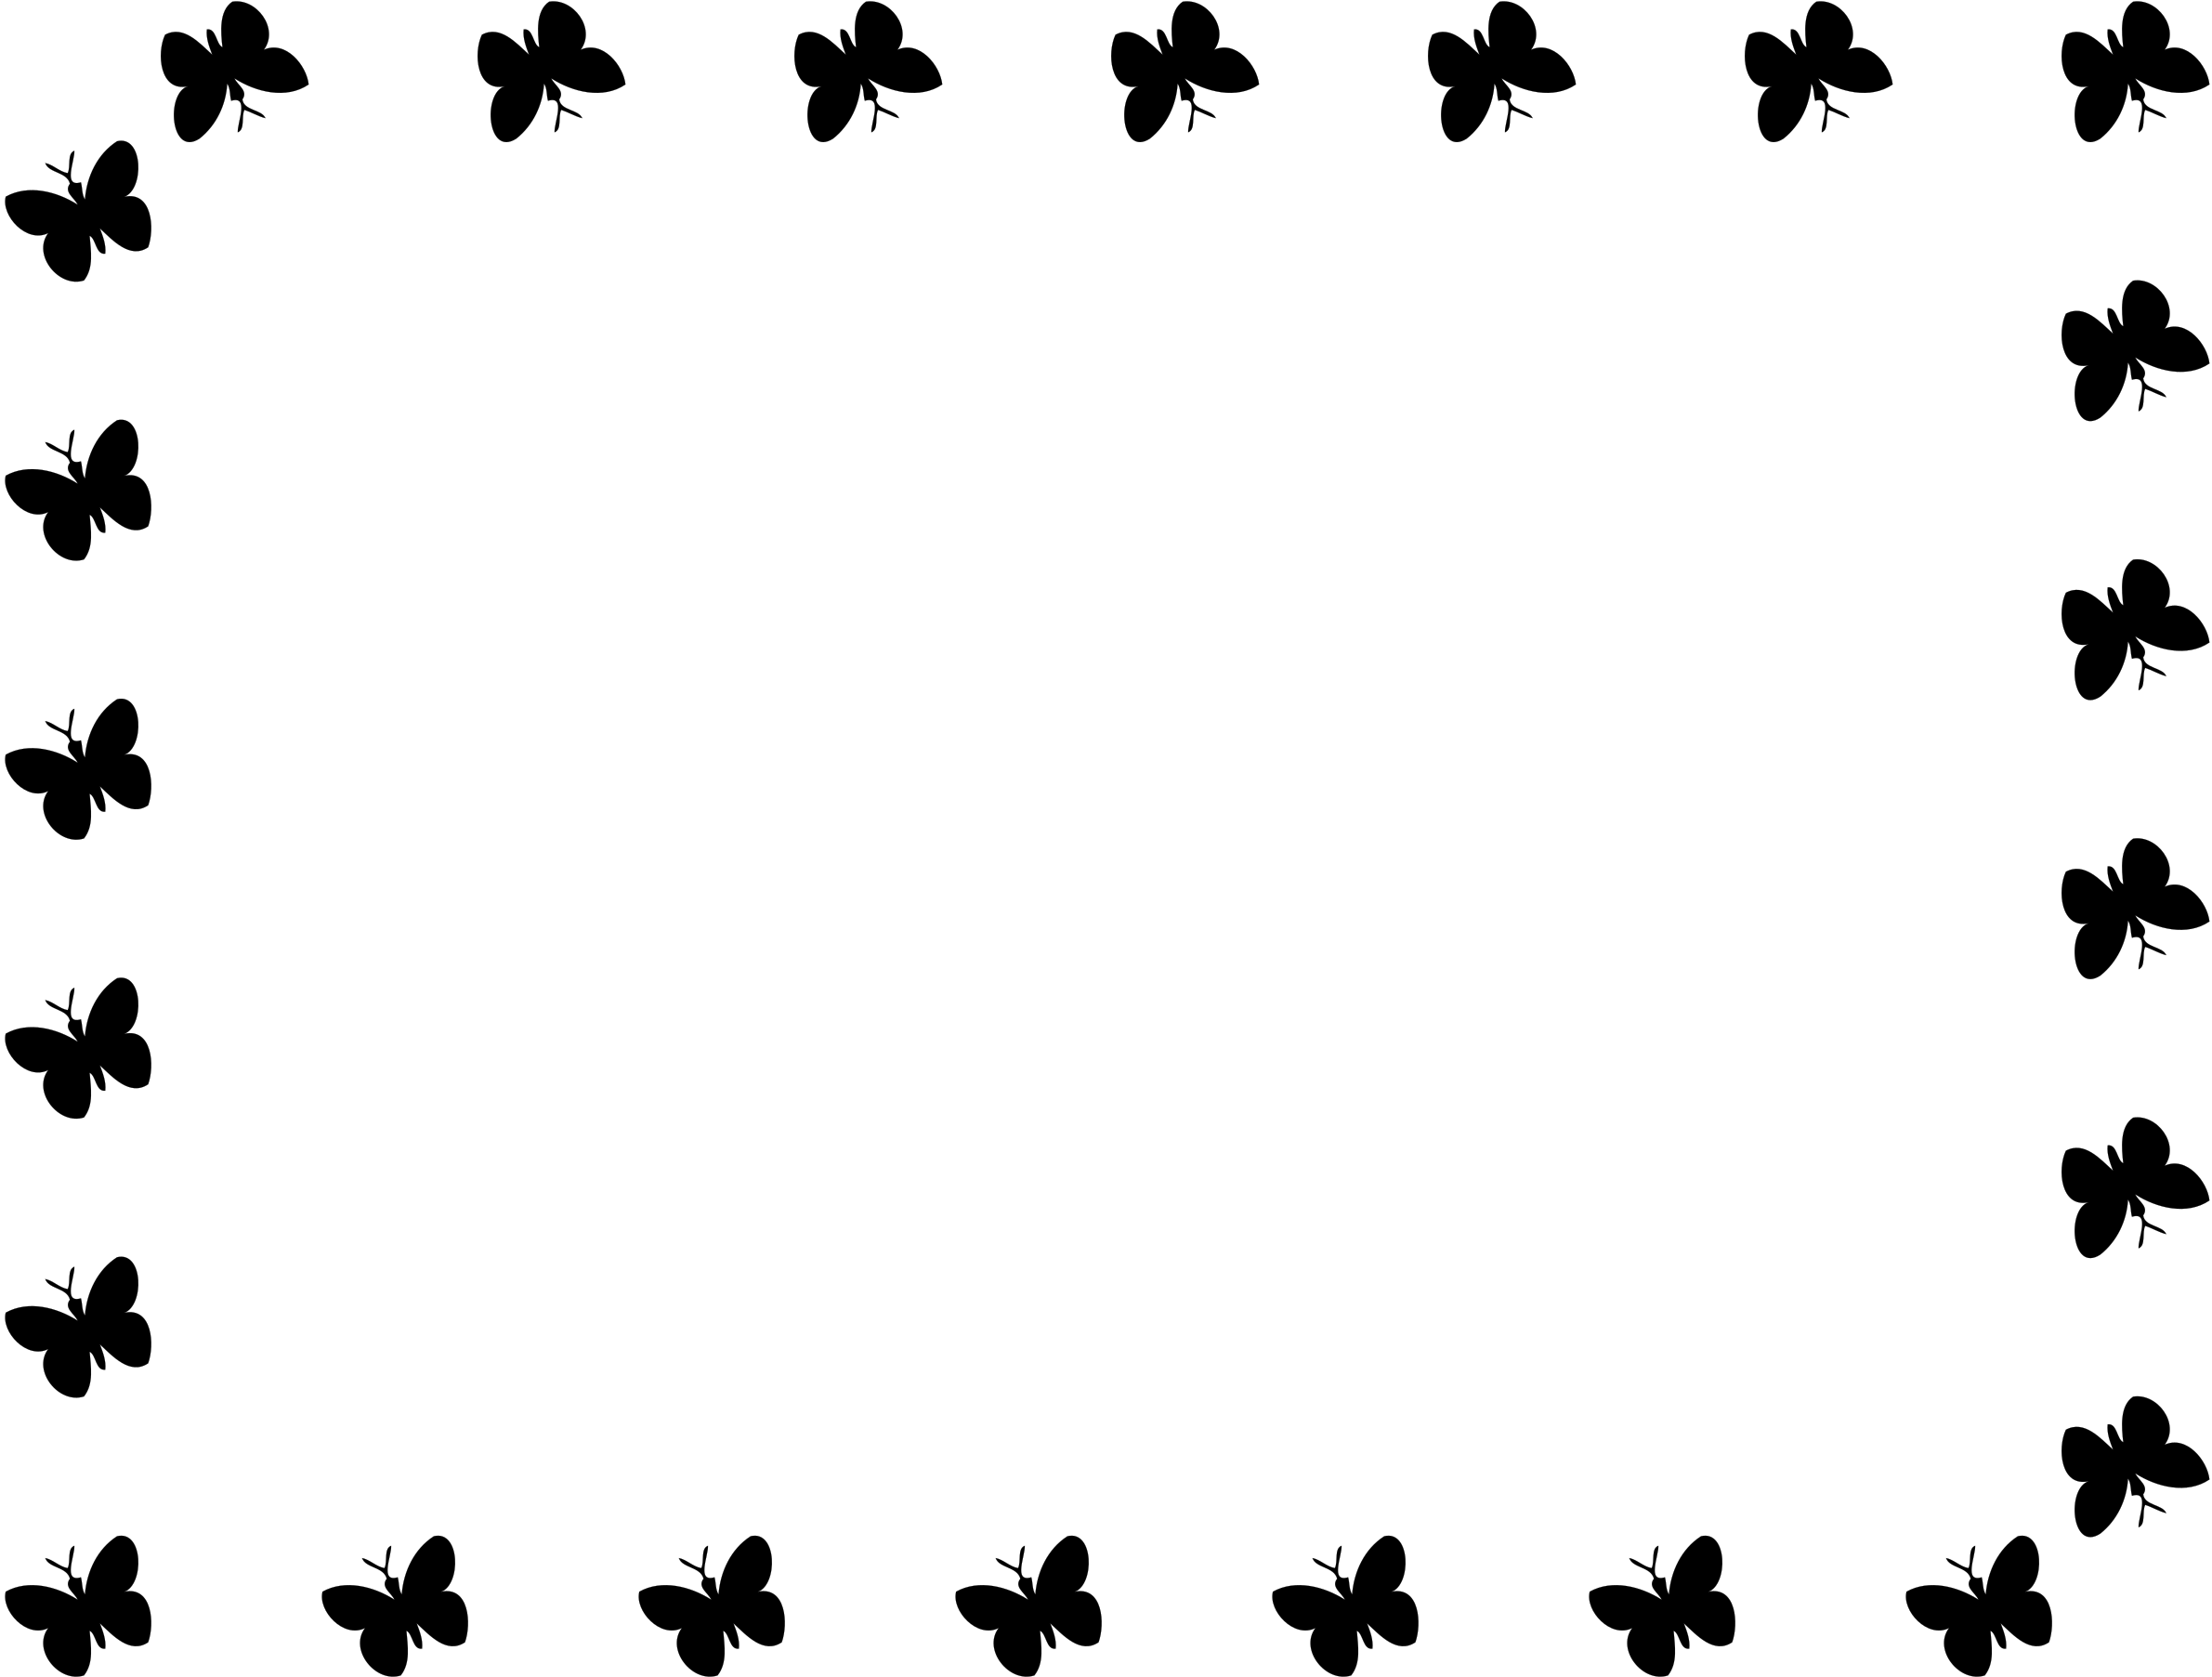 Butterfly Frame - Butterfly Border Clipart Black And White (2400x1824)